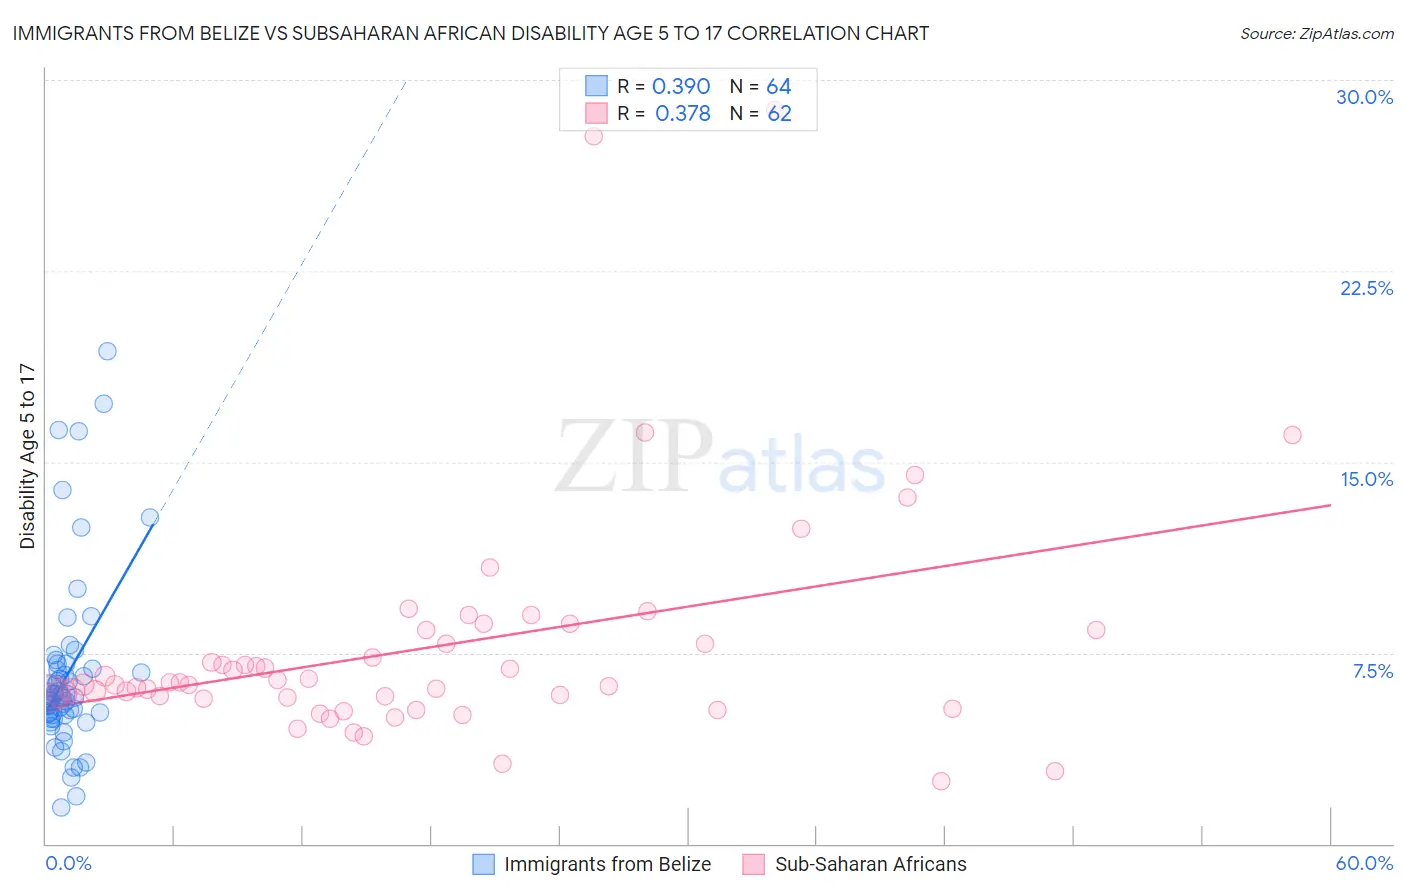 Immigrants from Belize vs Subsaharan African Disability Age 5 to 17